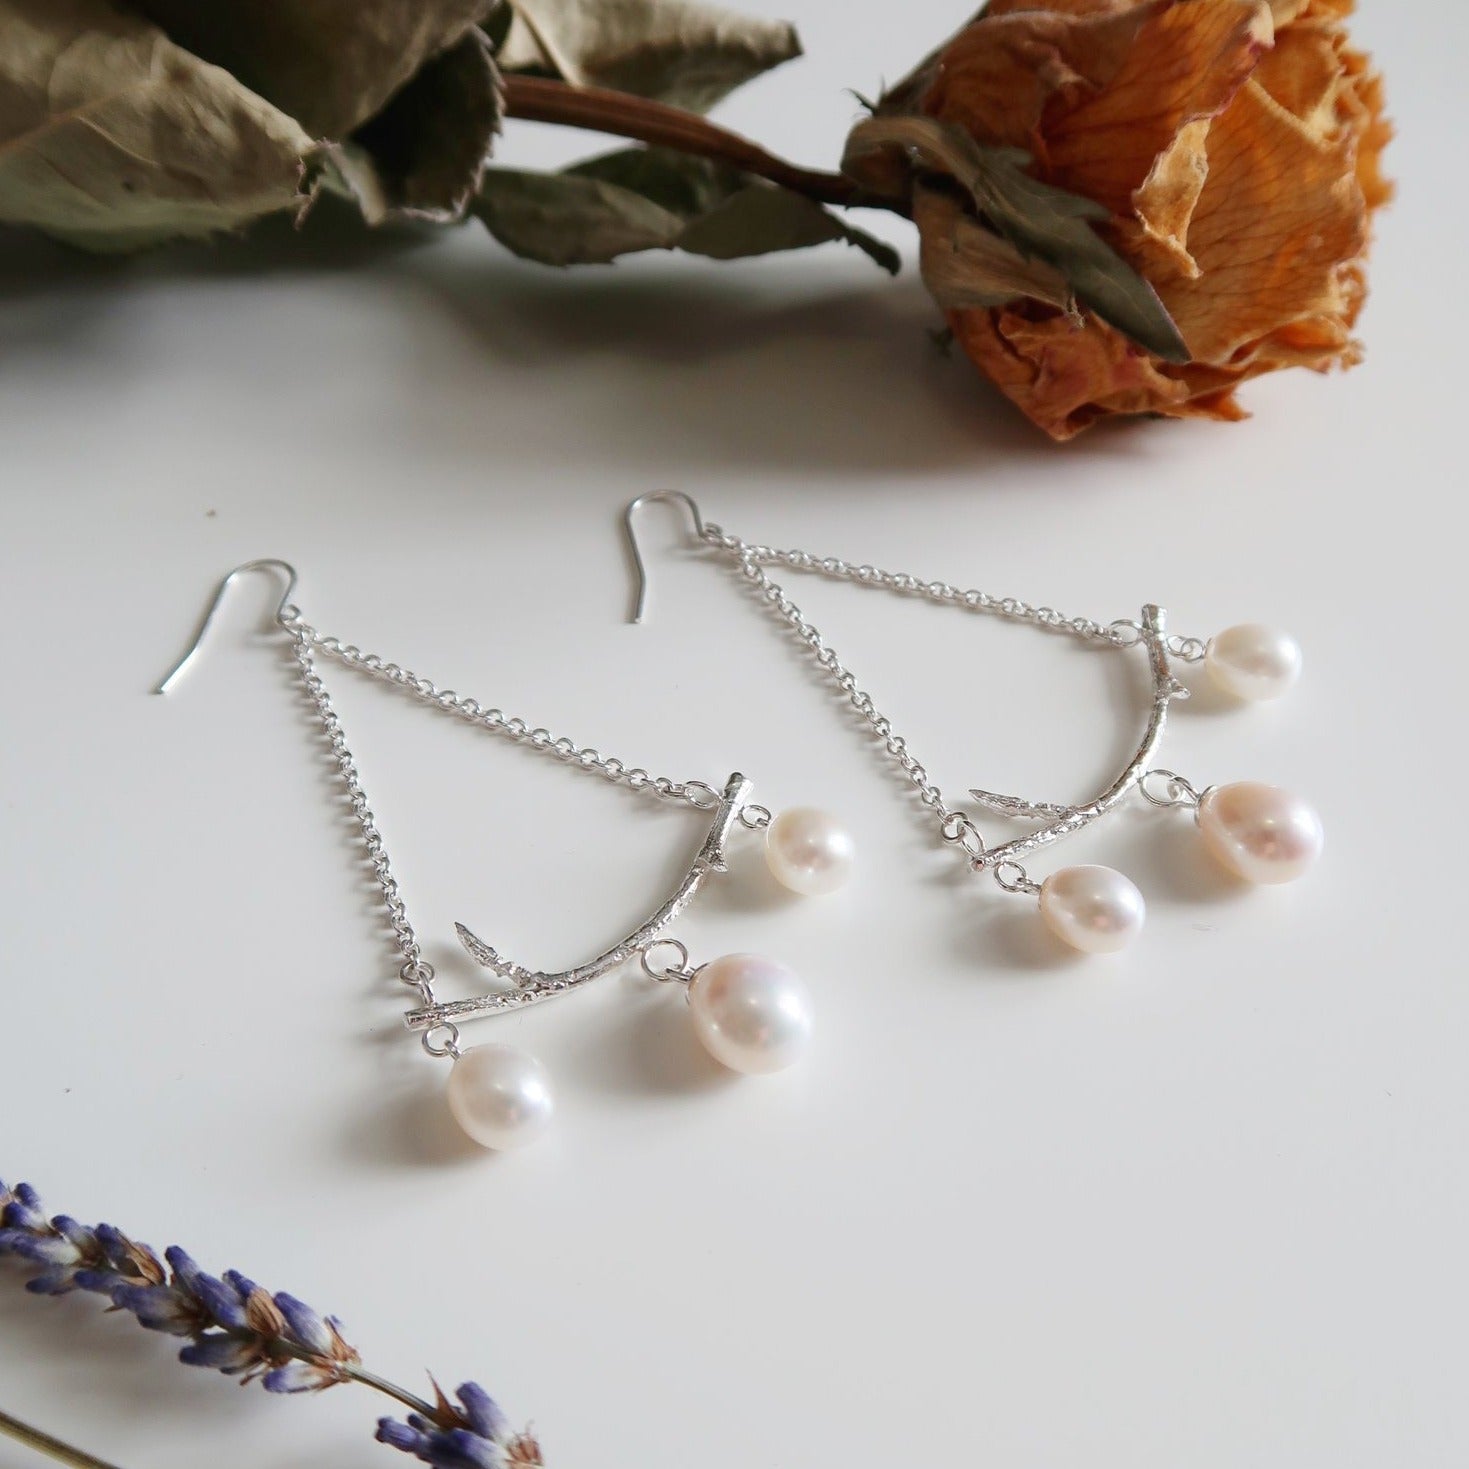 Branch Chandelier Earrings with Pearls - Magpie Jewellery